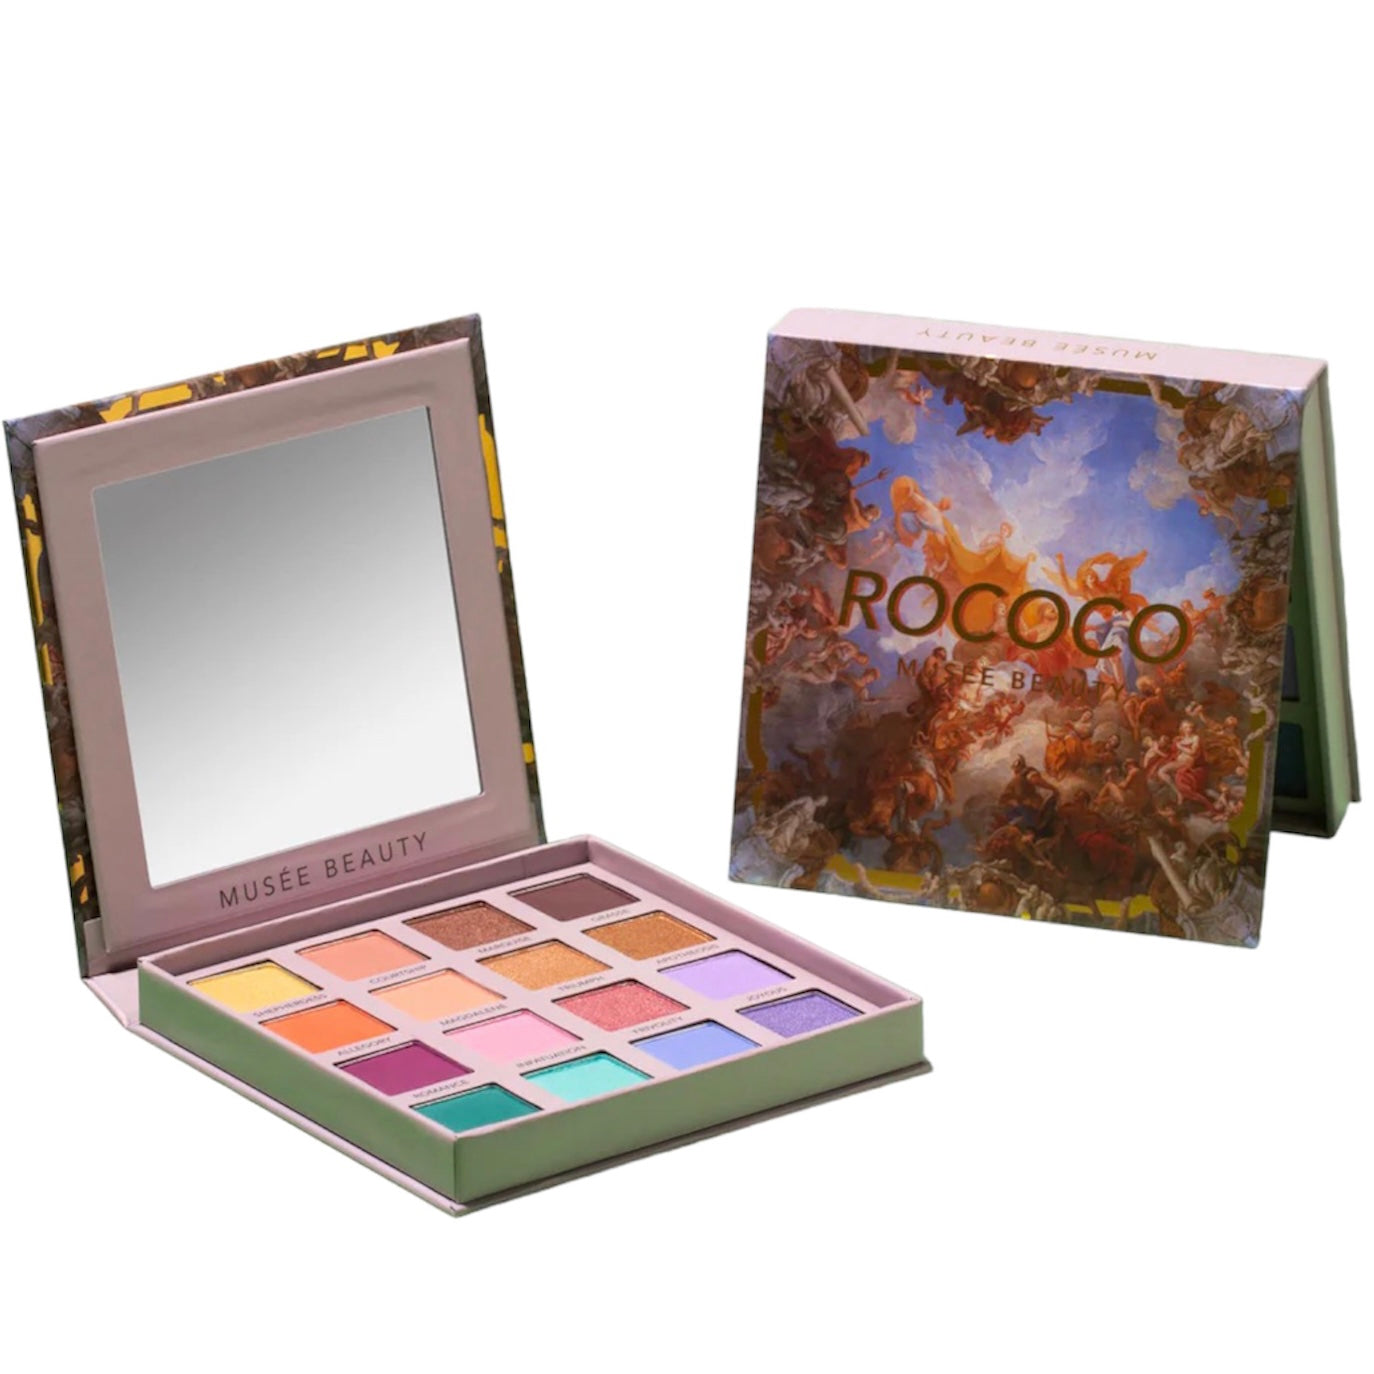 Musee Beauty Rococo Palette